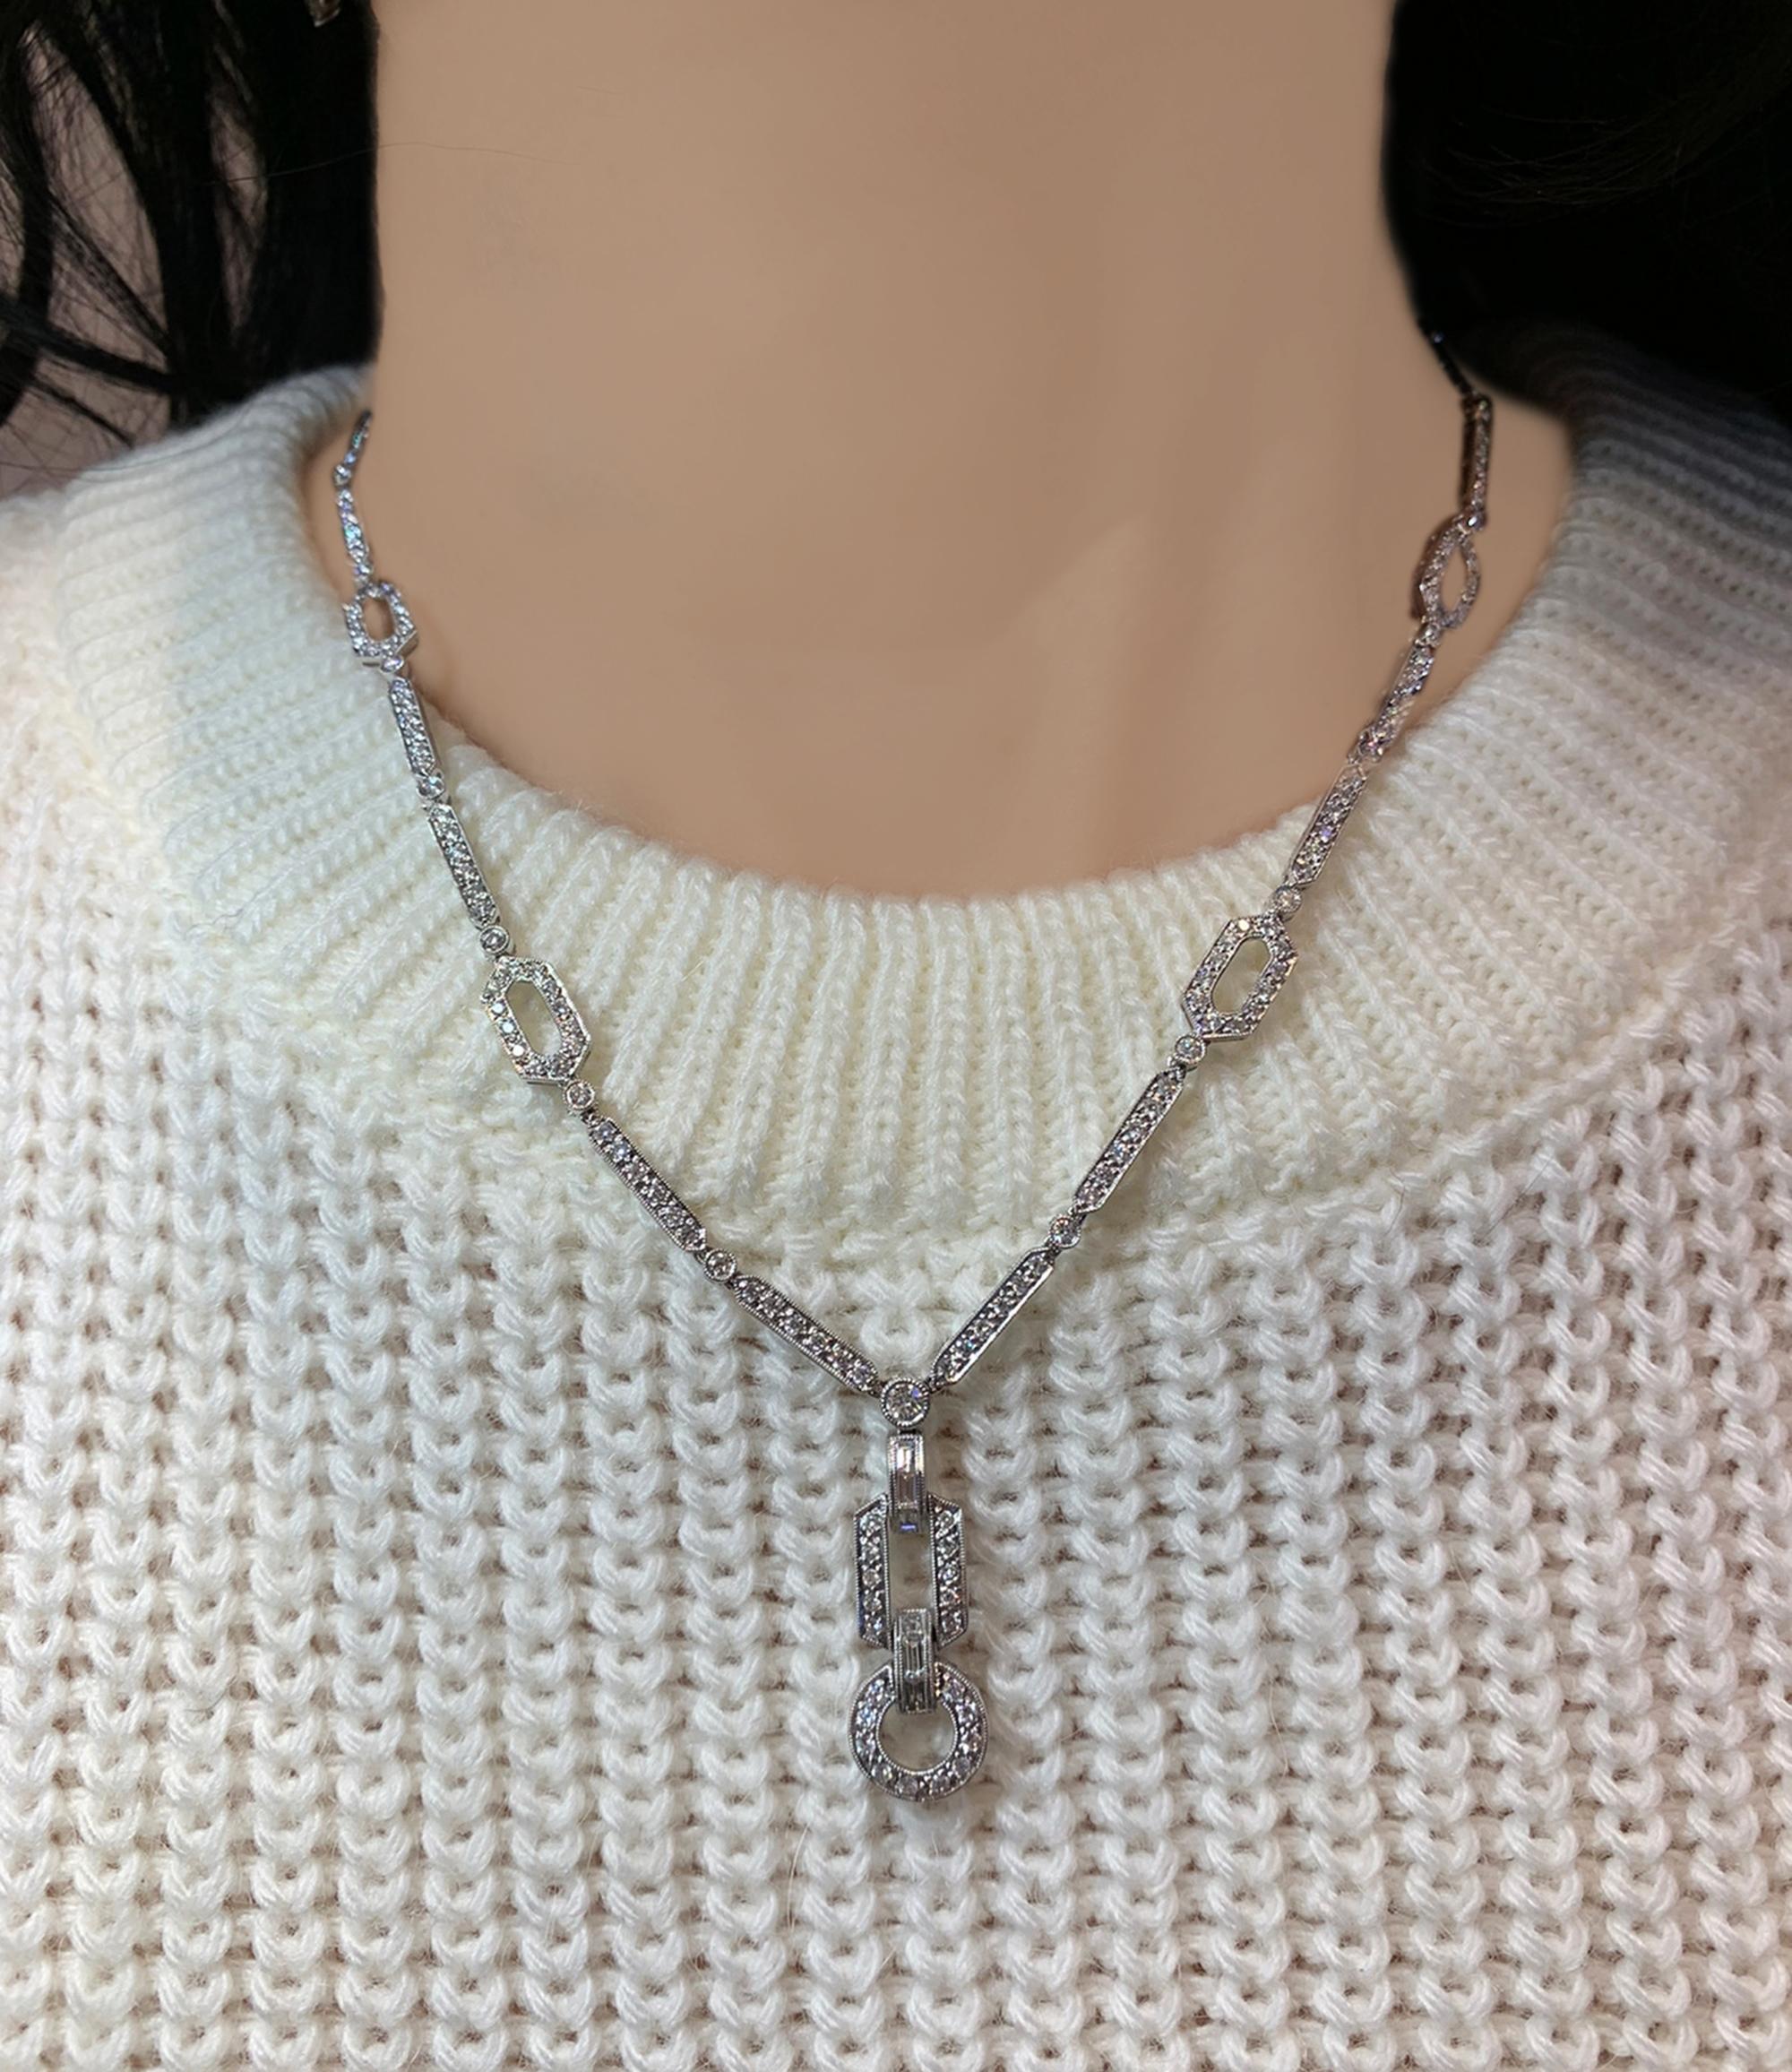 This Contemporary Diamond Pave Articulated Lavalier Necklace has a unique combination of elements from jewelry history yet is sparkles and coheres like an exquisite modern piece. Crafted in 18K white gold in the 21st century, circa 2000s, the